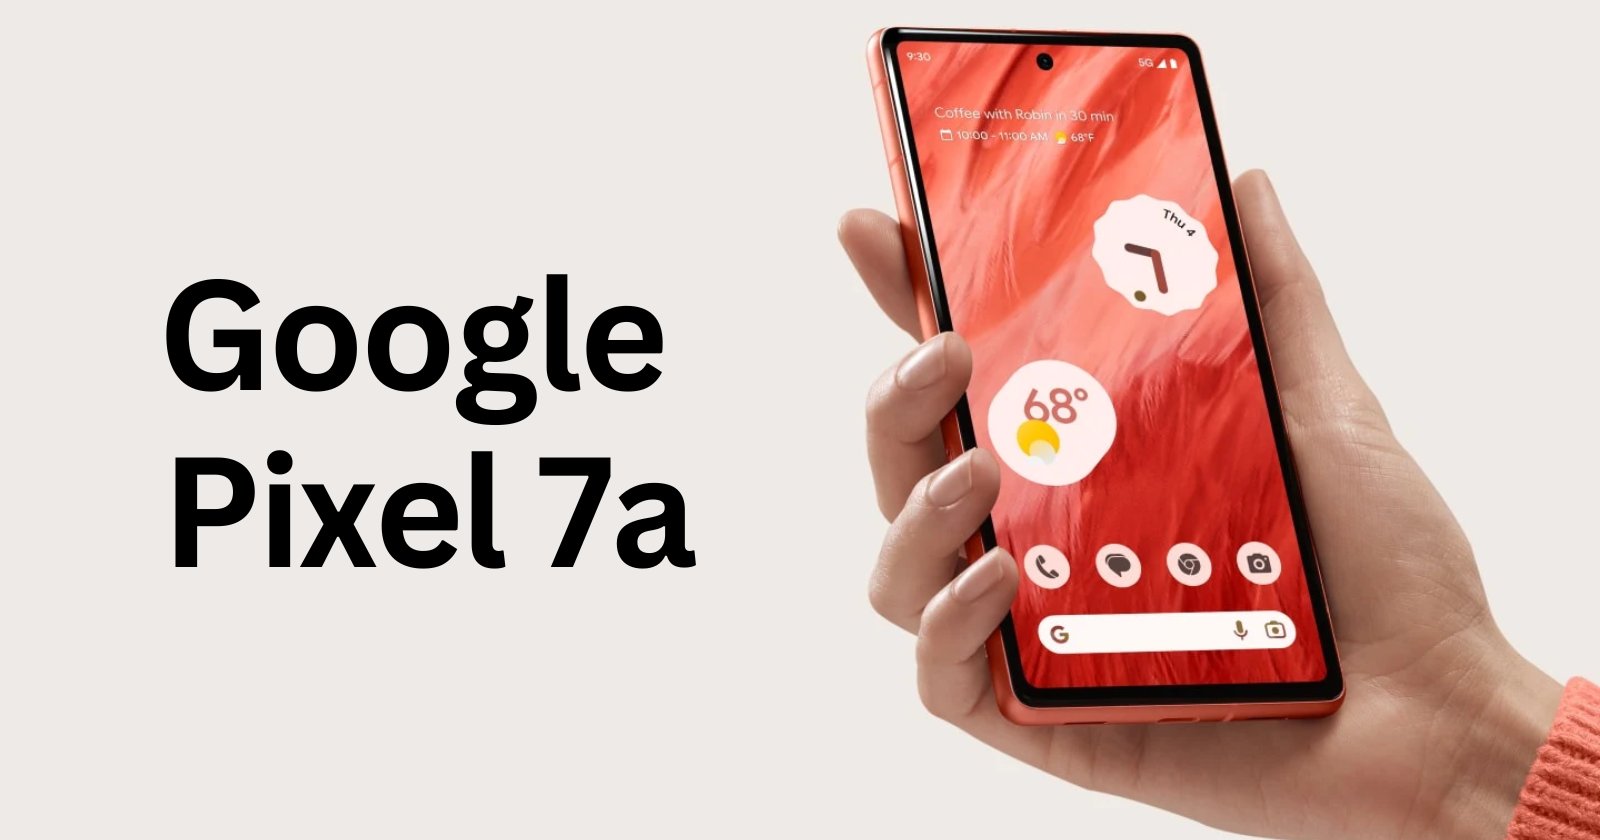 Bag a Google Pixel 7a and Fitbit Versa 4 bundle starting at just £27.99/mo ($35.53) from Tesco Mobile in the UK